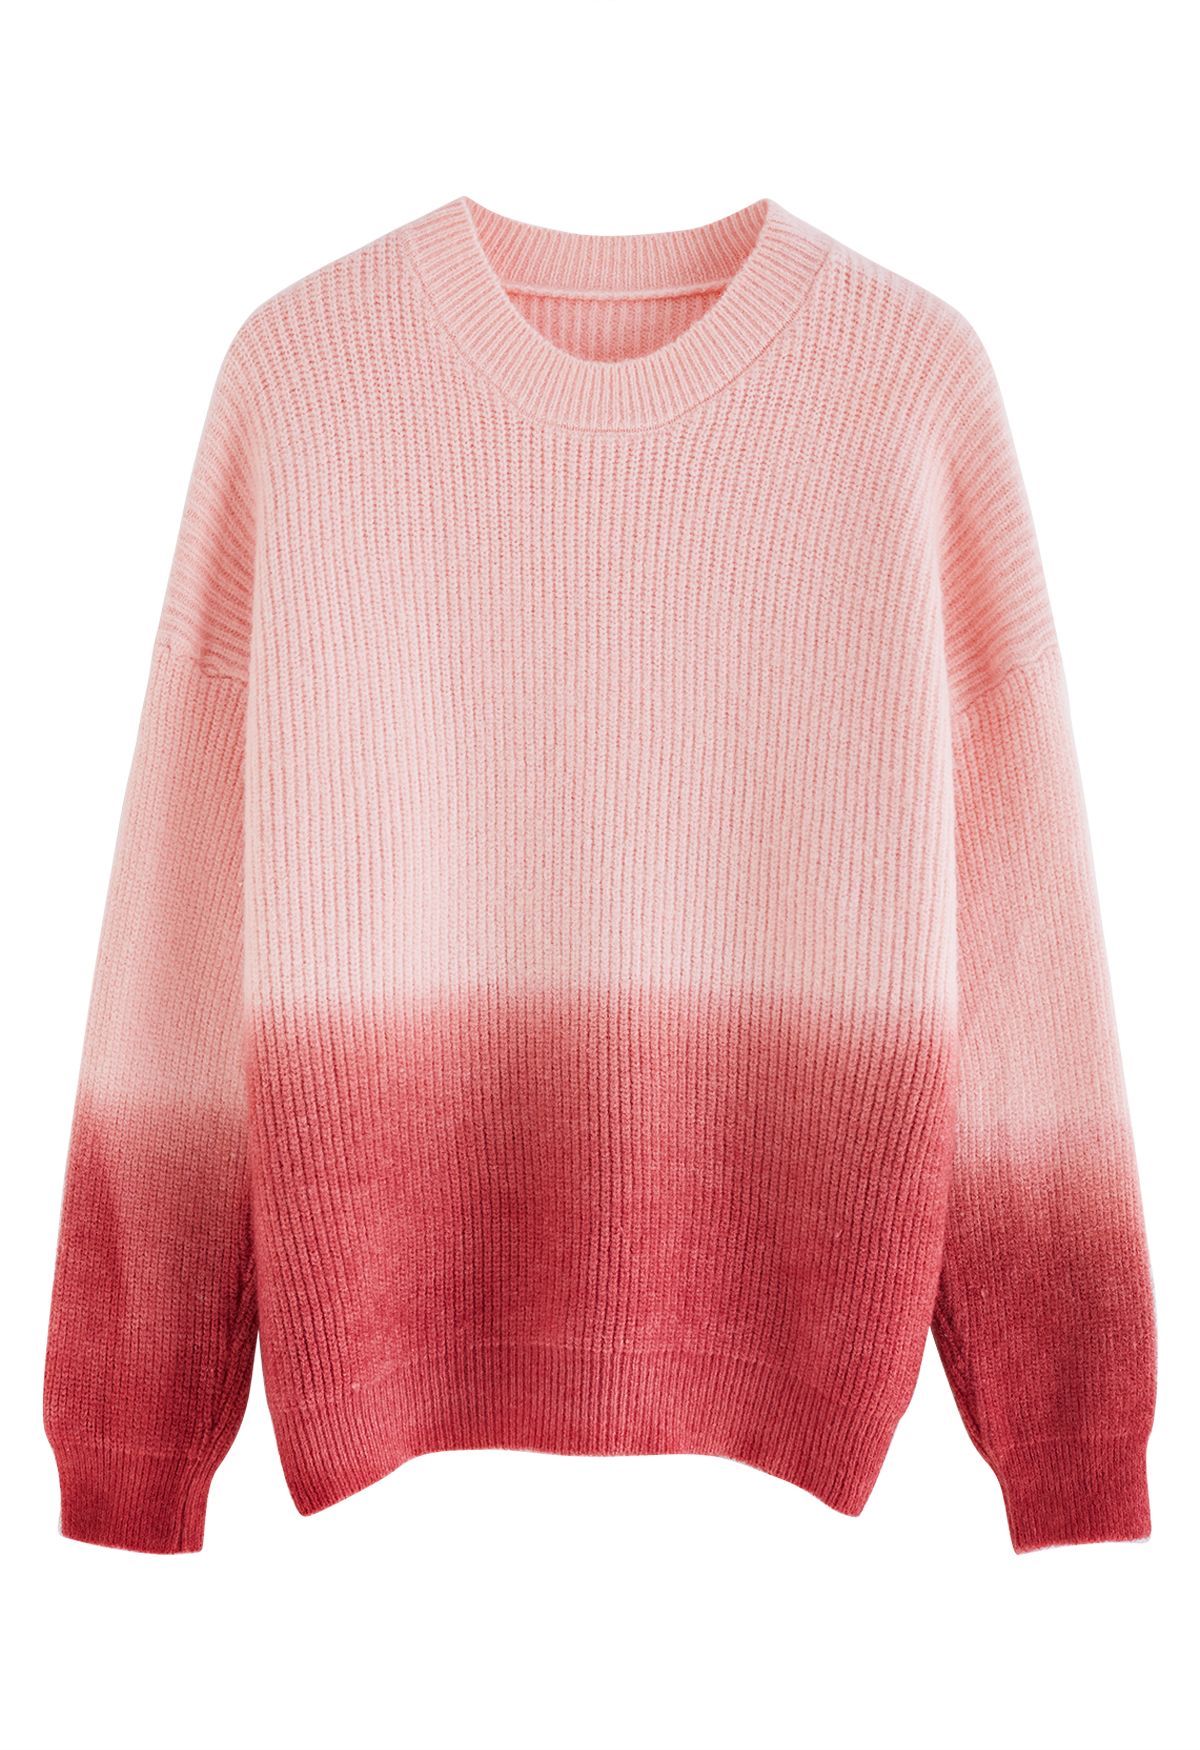 Ombre Round Neck Rib Knit Sweater in Pink - Retro, Indie and Unique Fashion